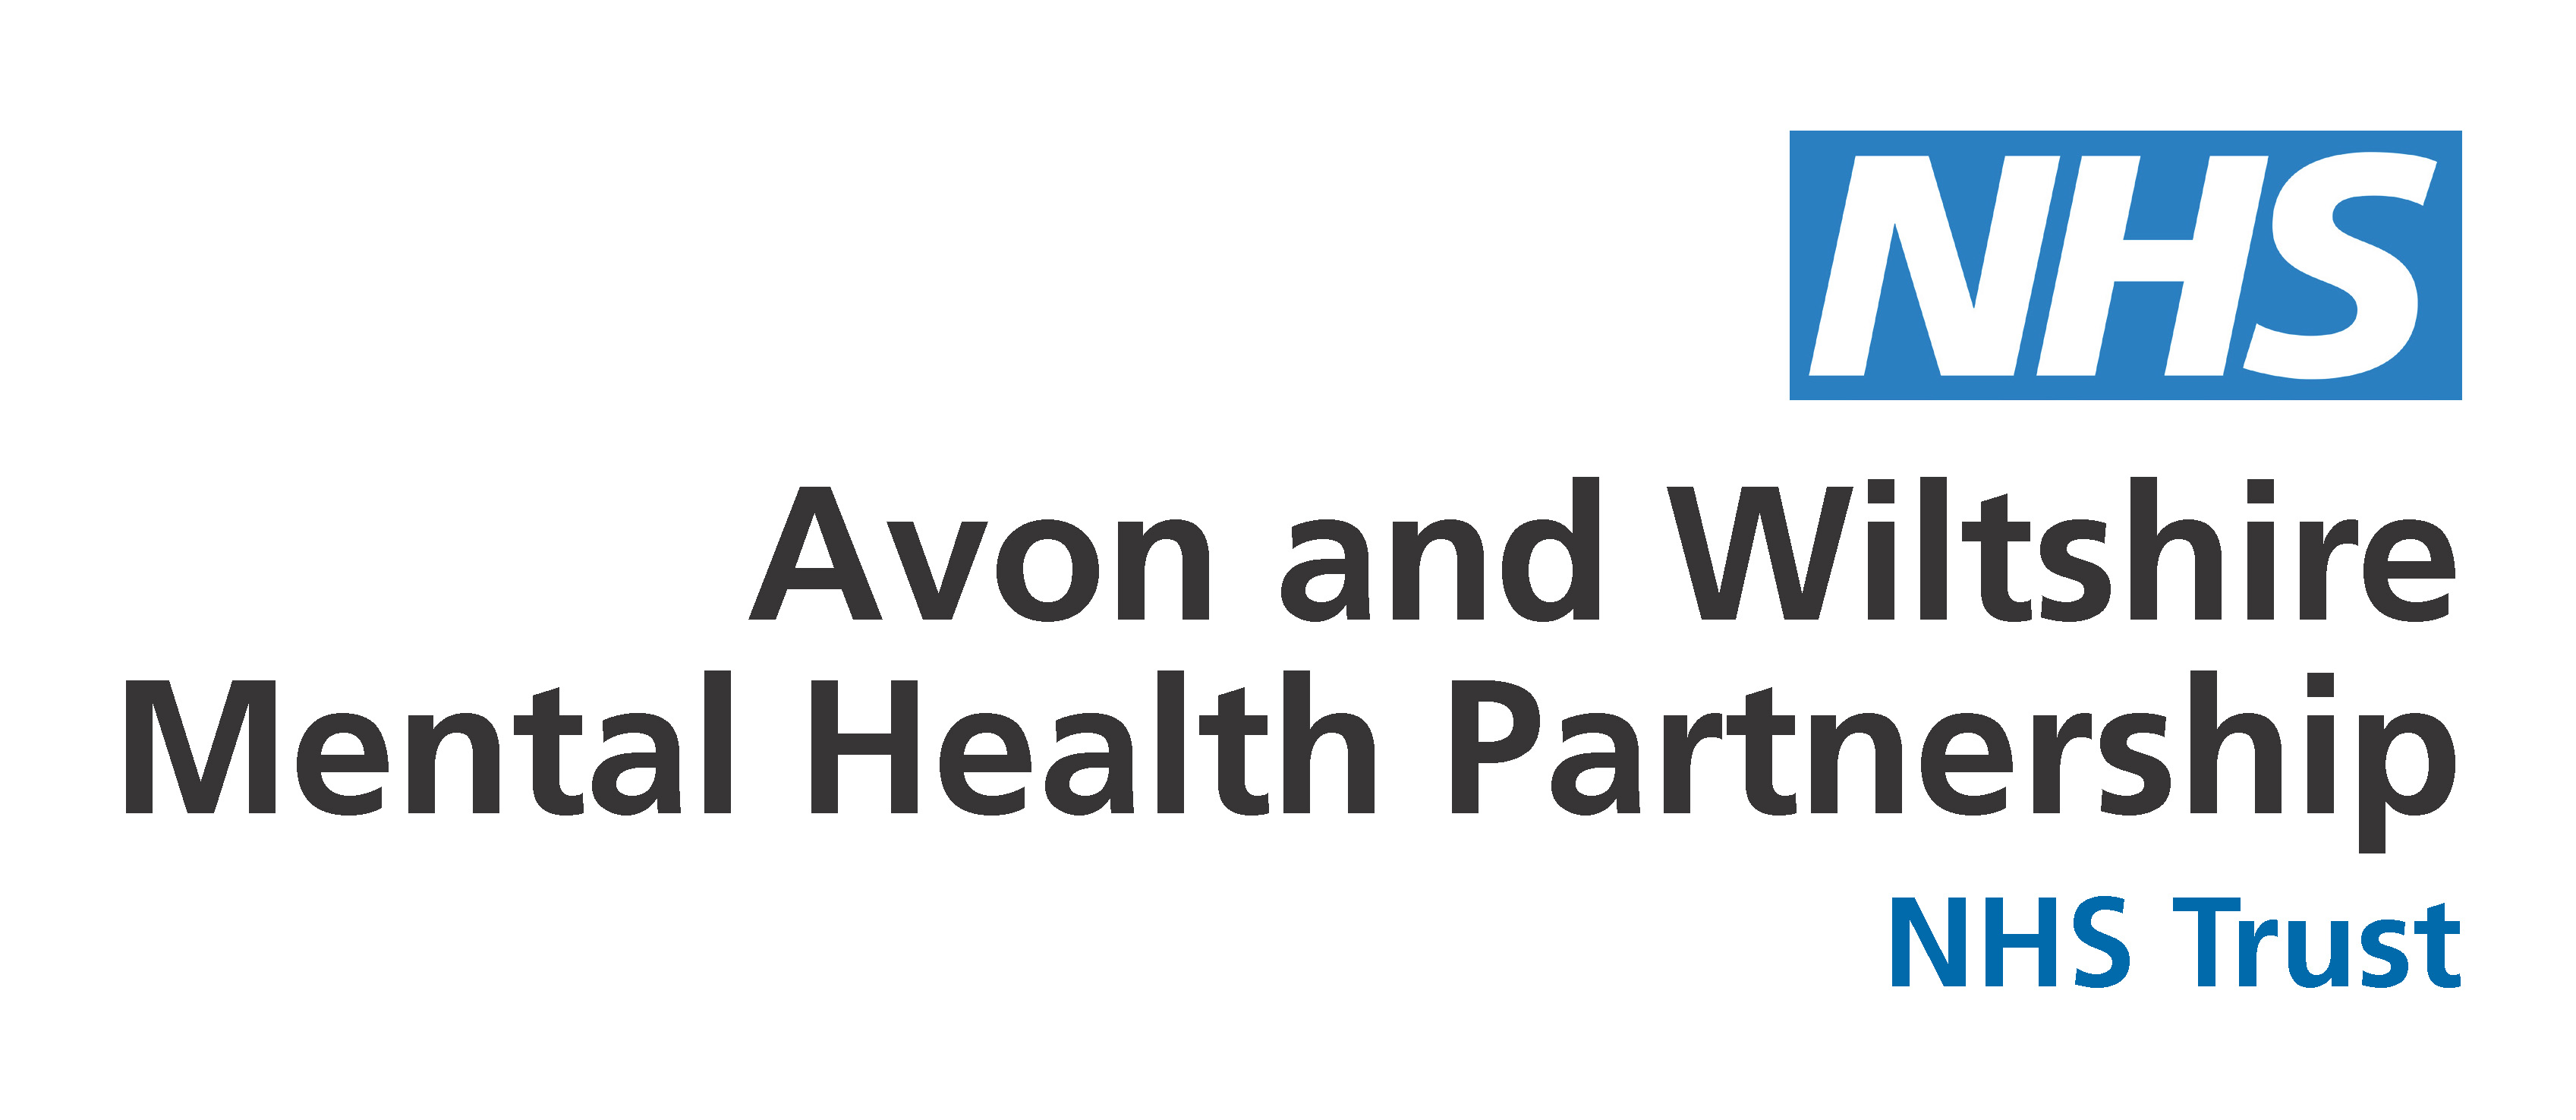 Avon and Wiltshire Mental Health Partnership NHS Trust are exhibiting at the Nursing Careers and Jobs Fair